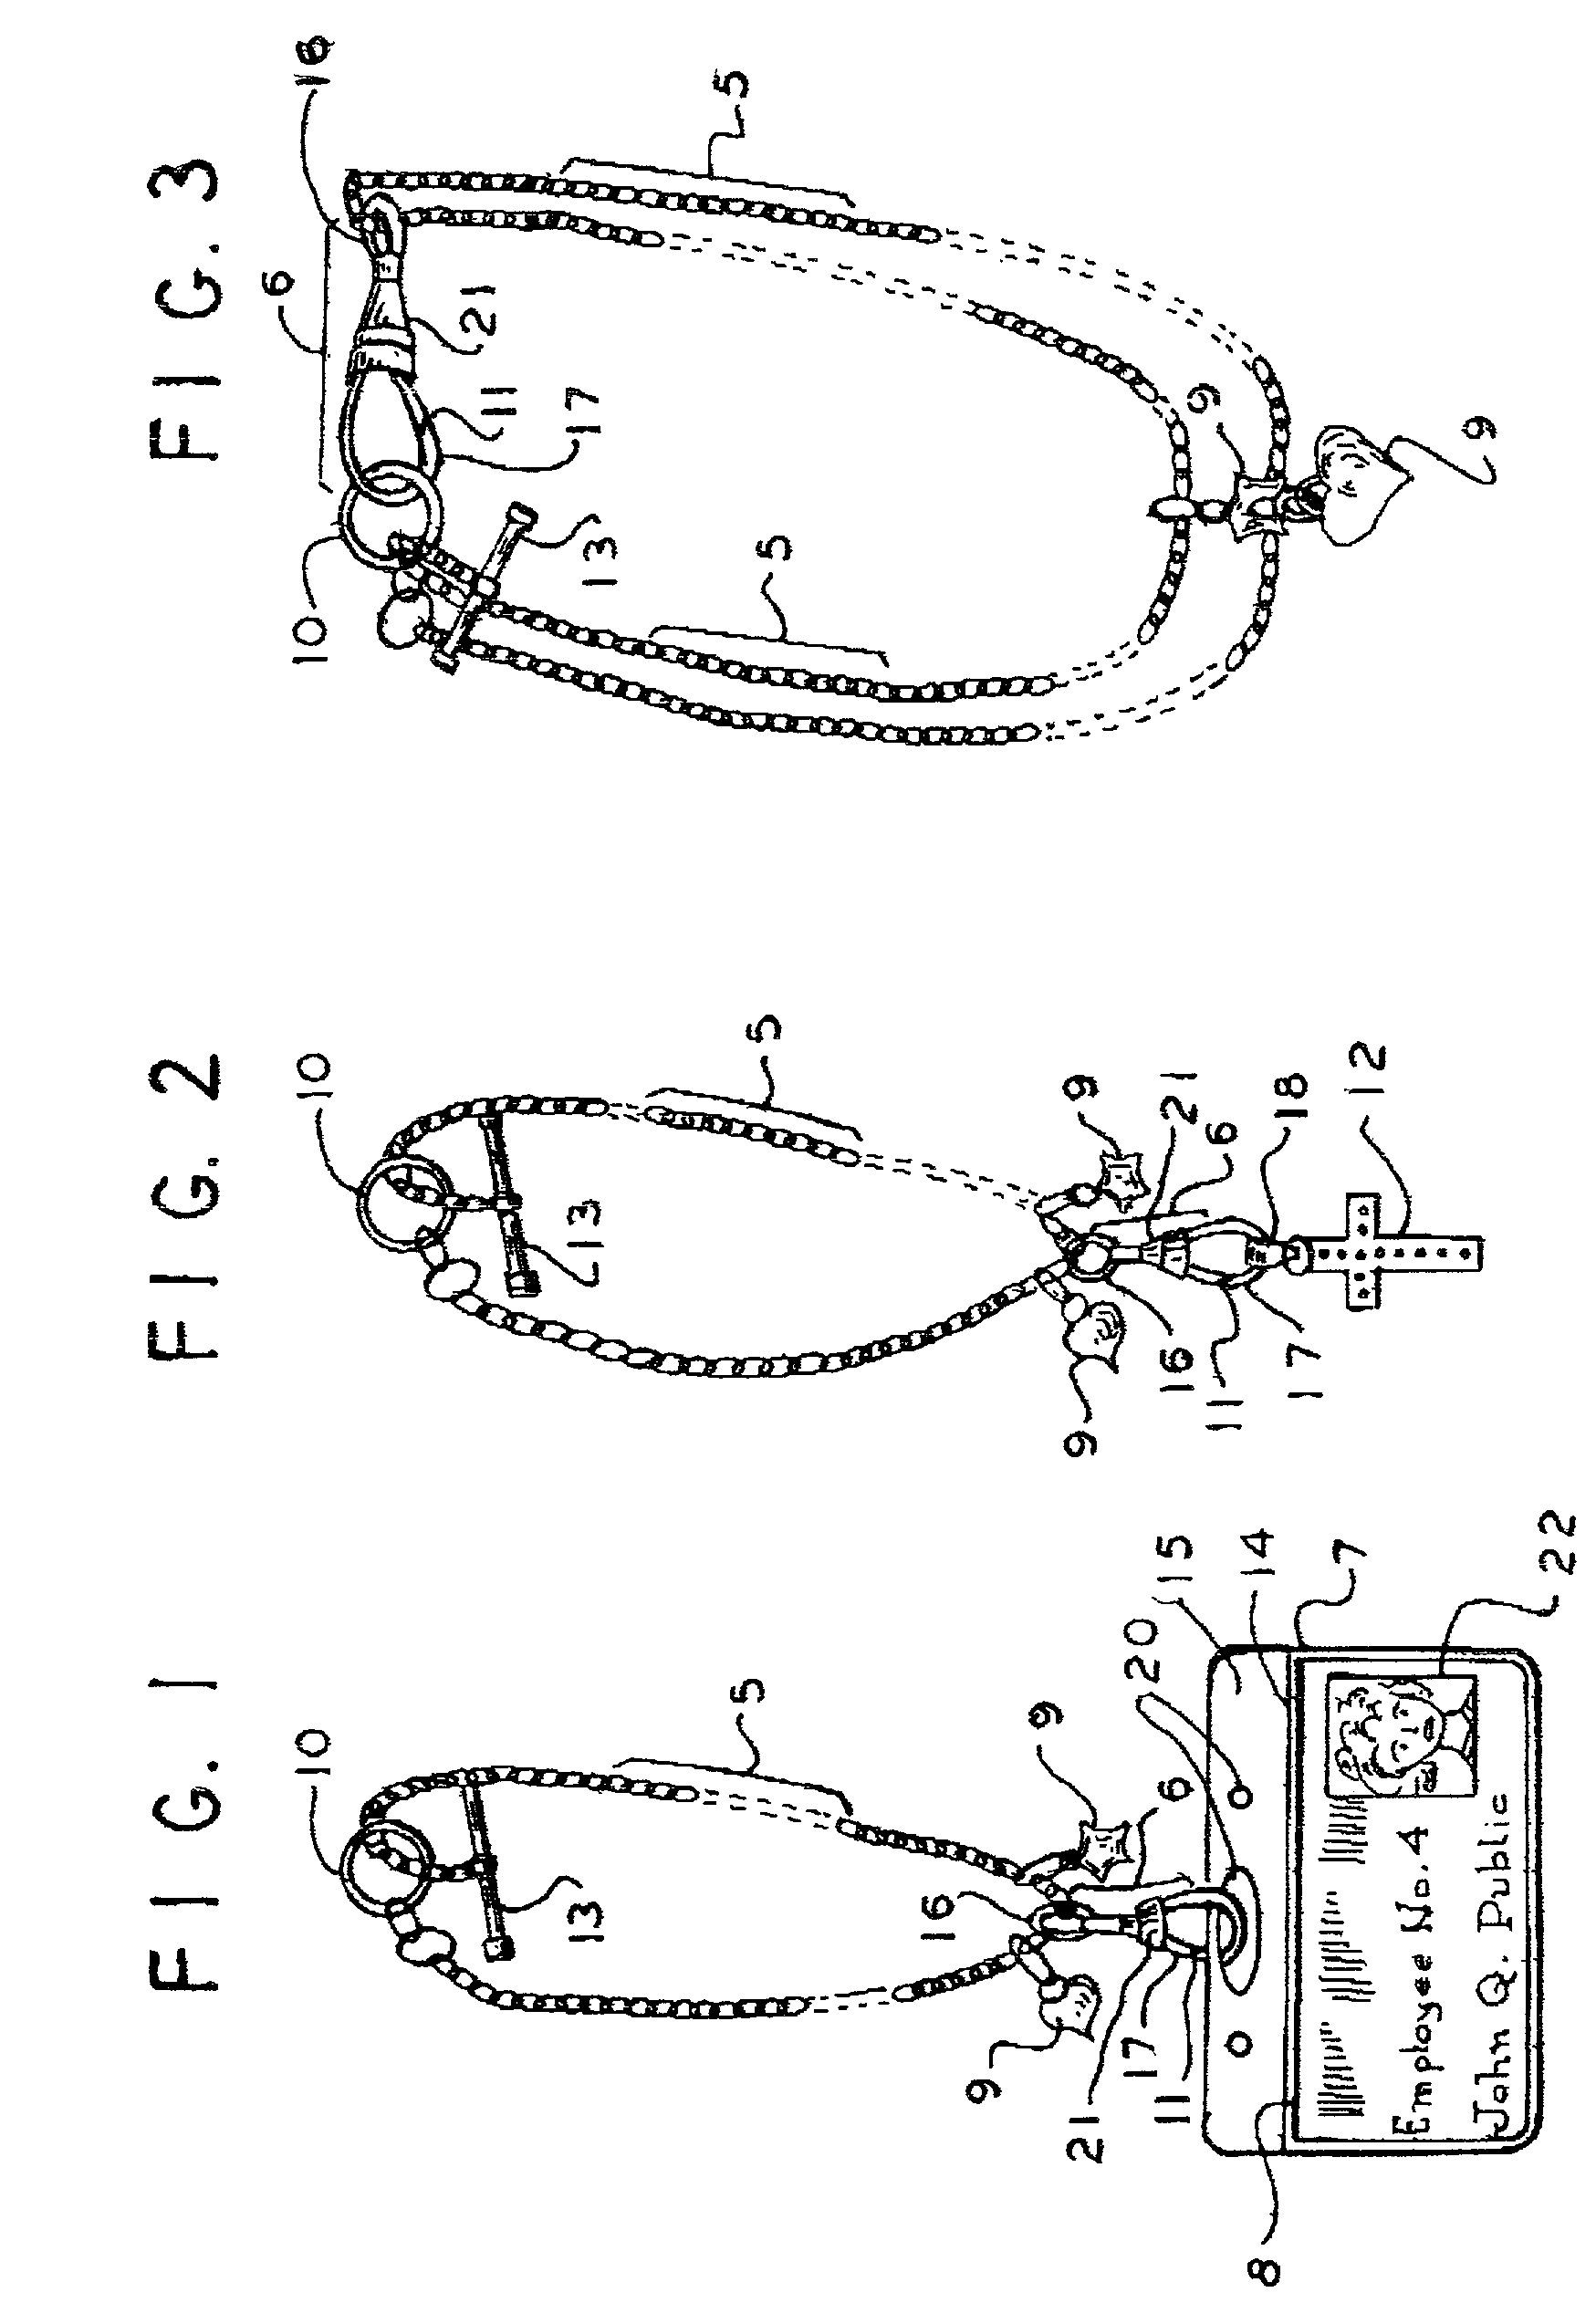 Convertible identification (ID) tag and jewelry